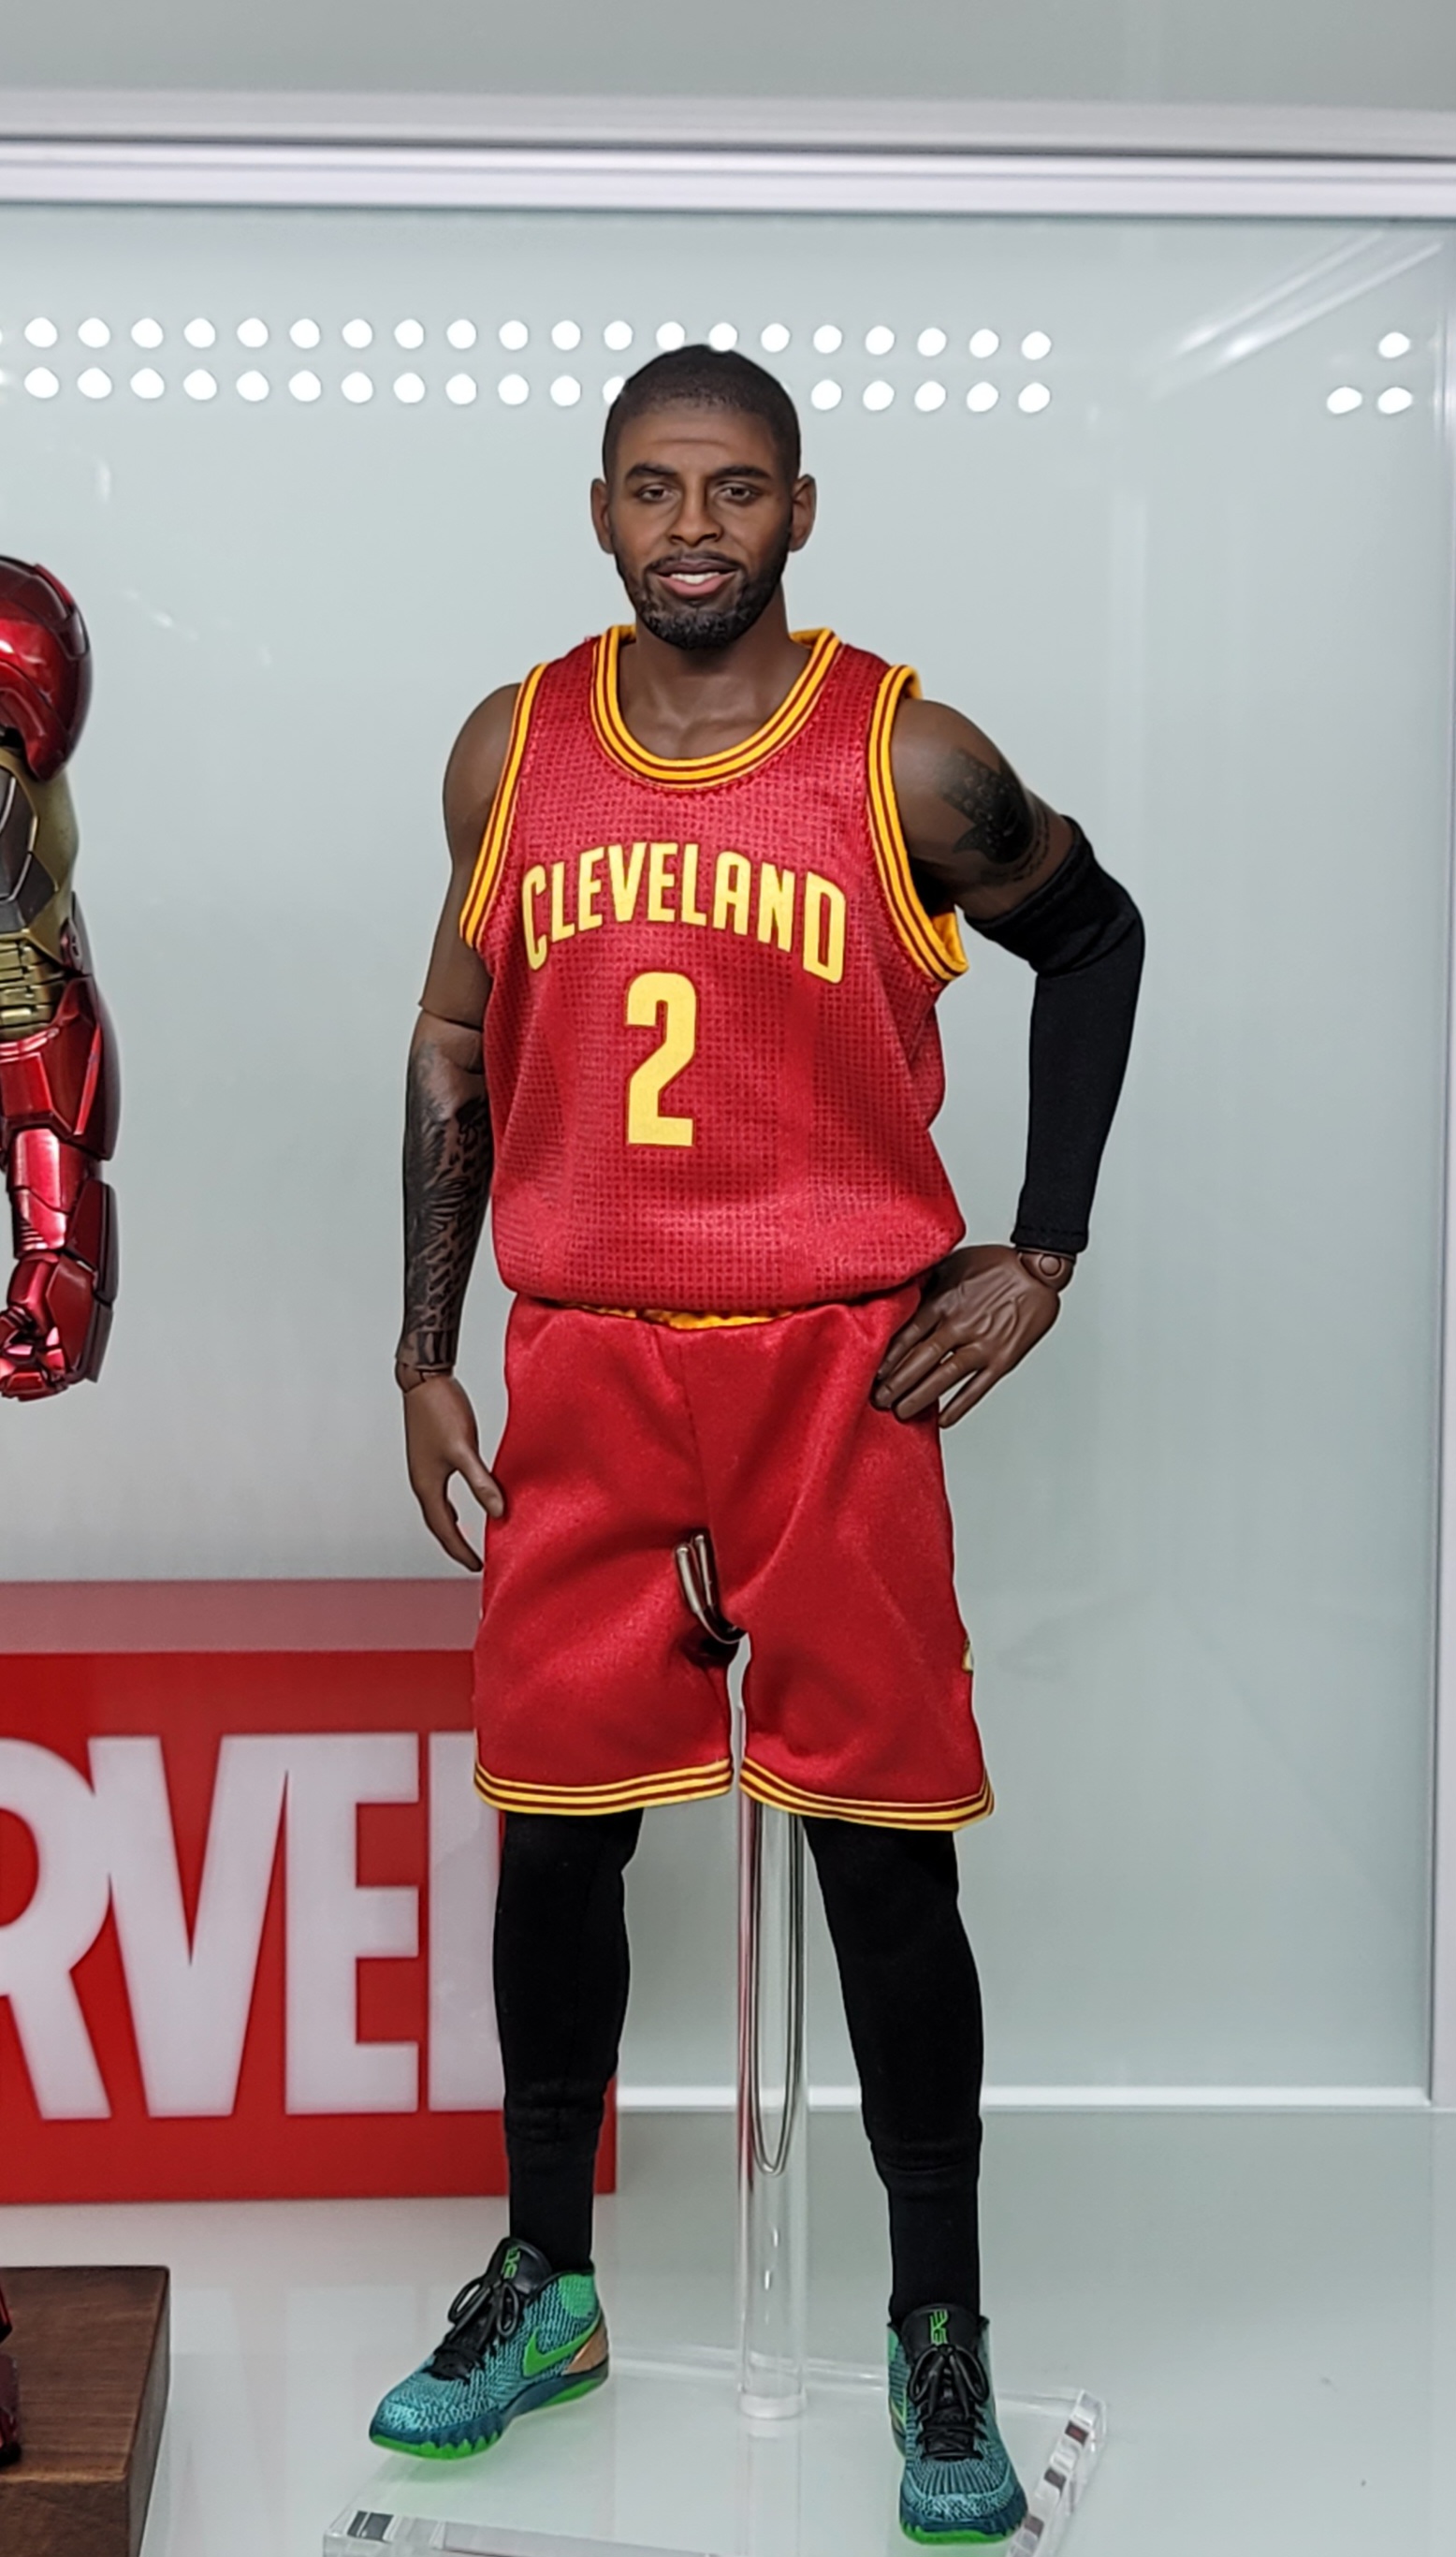 For Sale - 1/6 kyrie irving custom figure - 100 limited edition